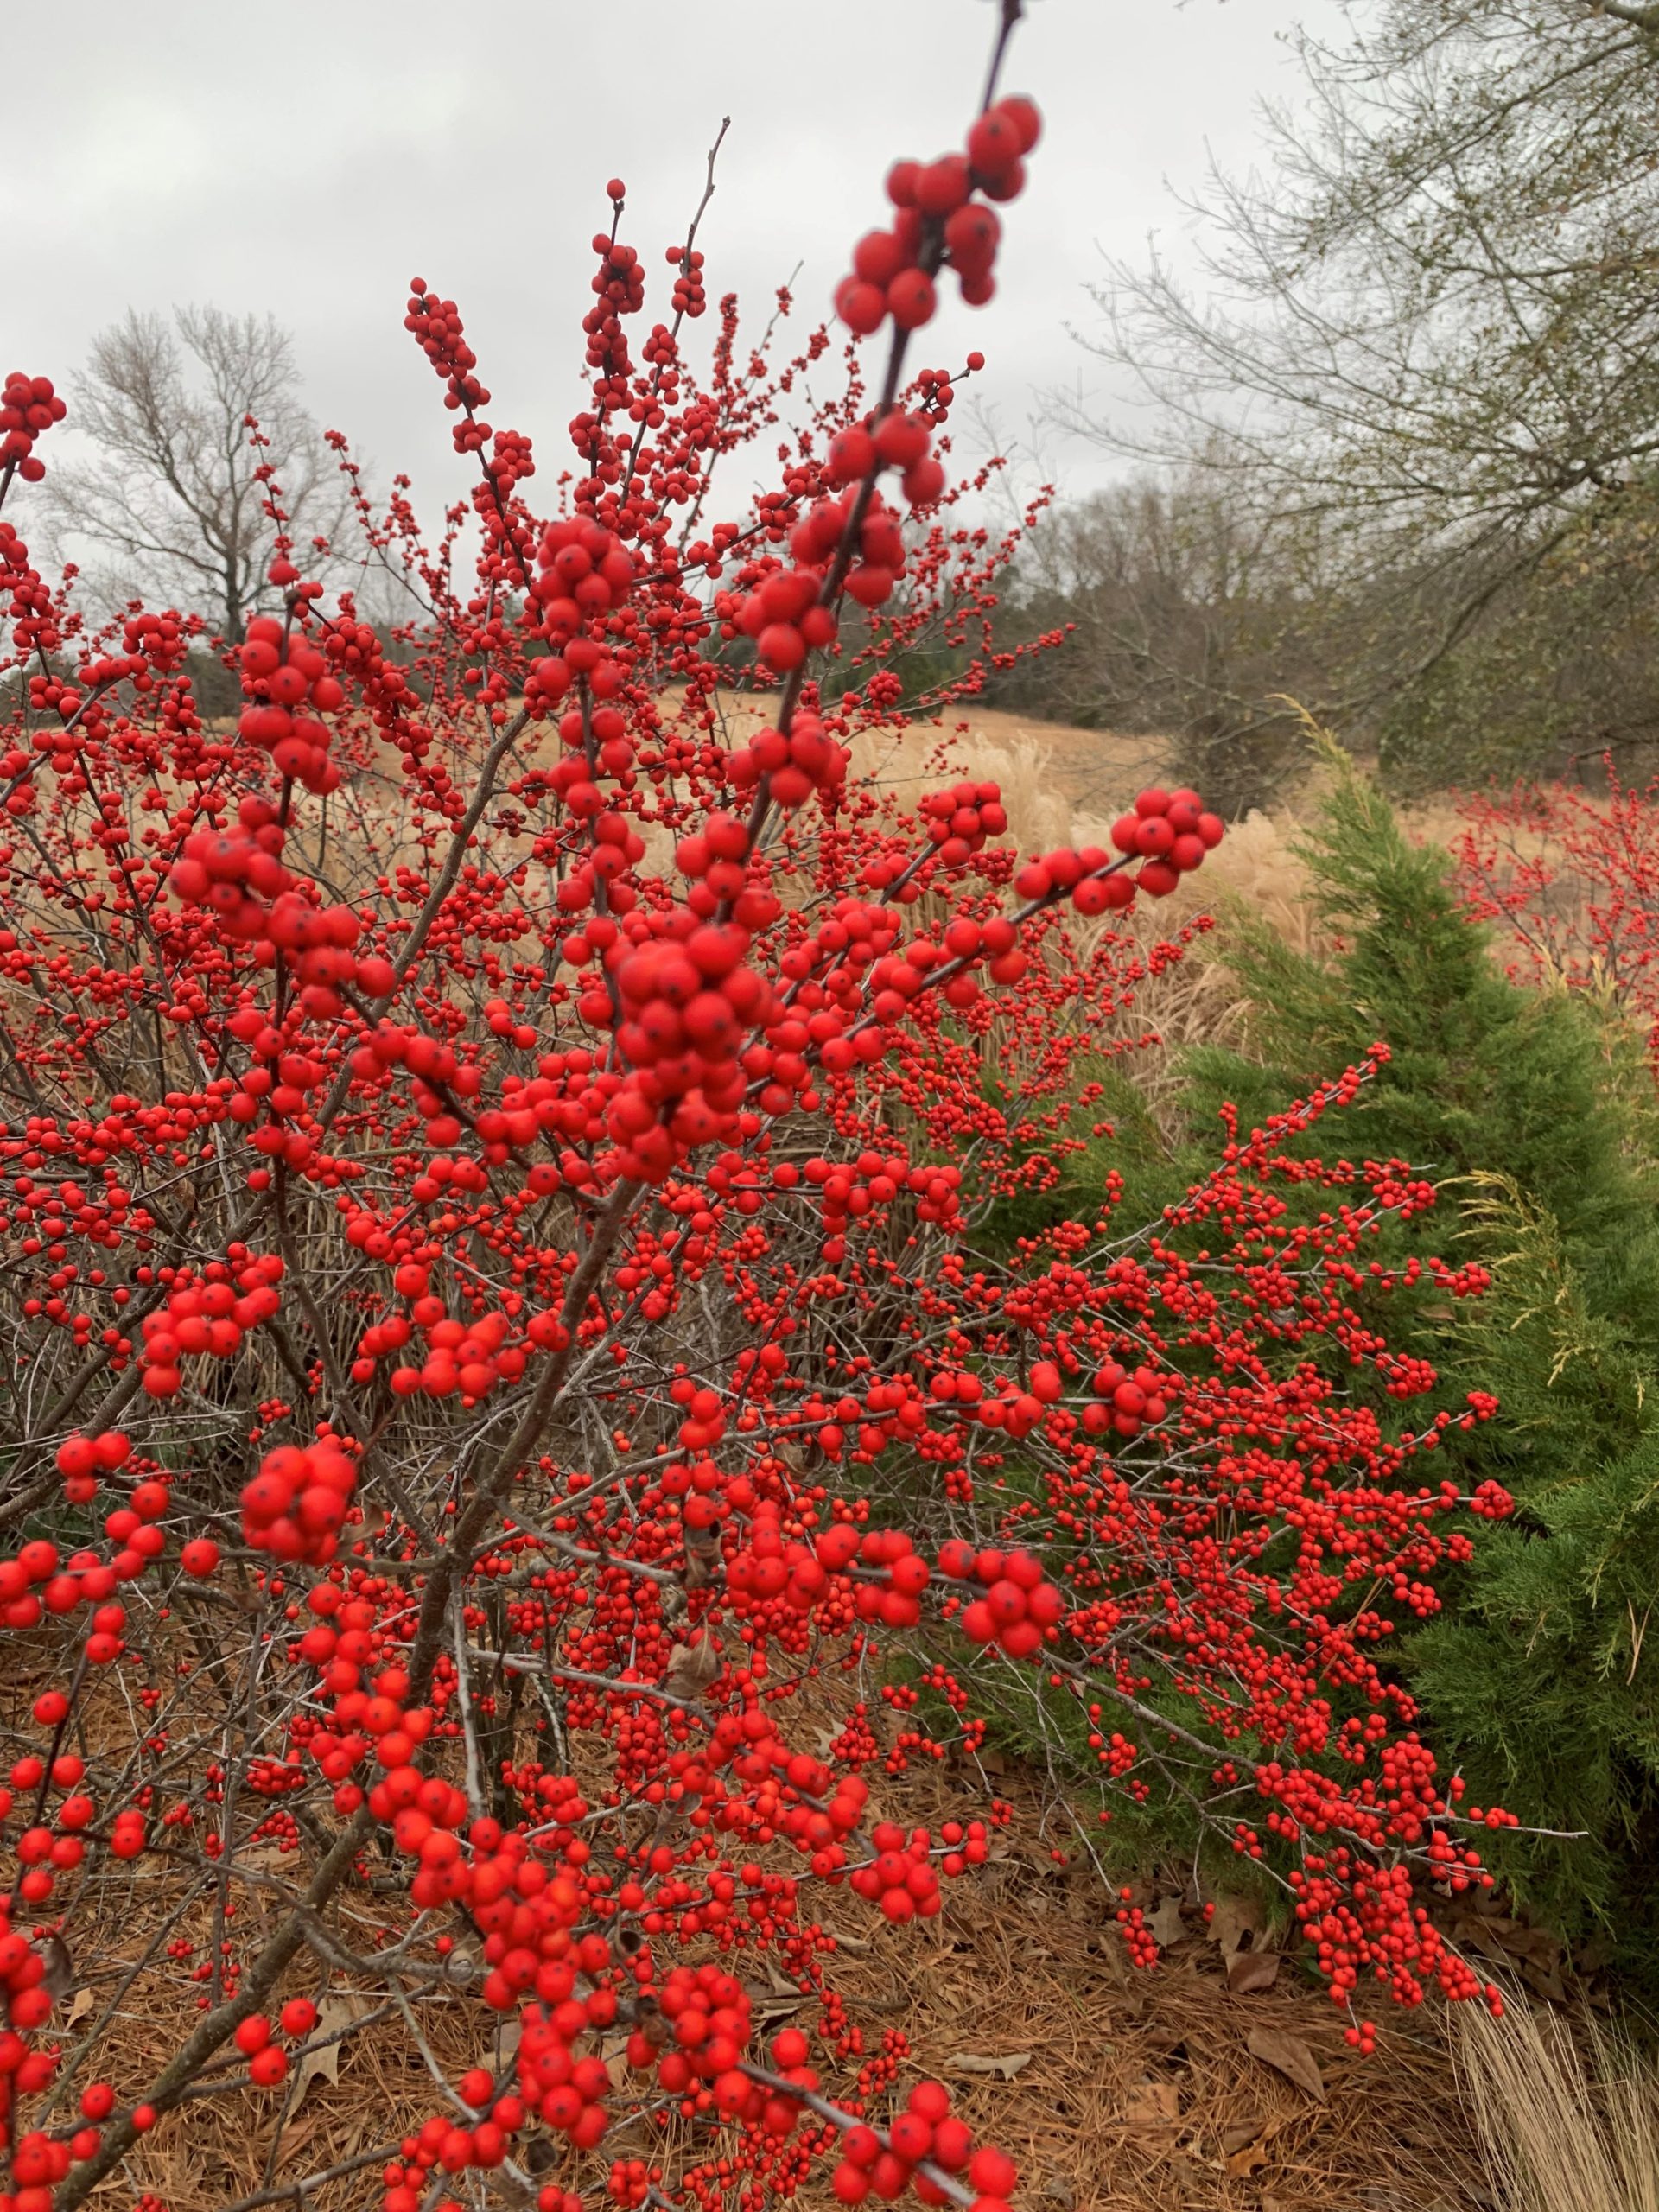 winterberry holly blazes in color across its namesake months | ut